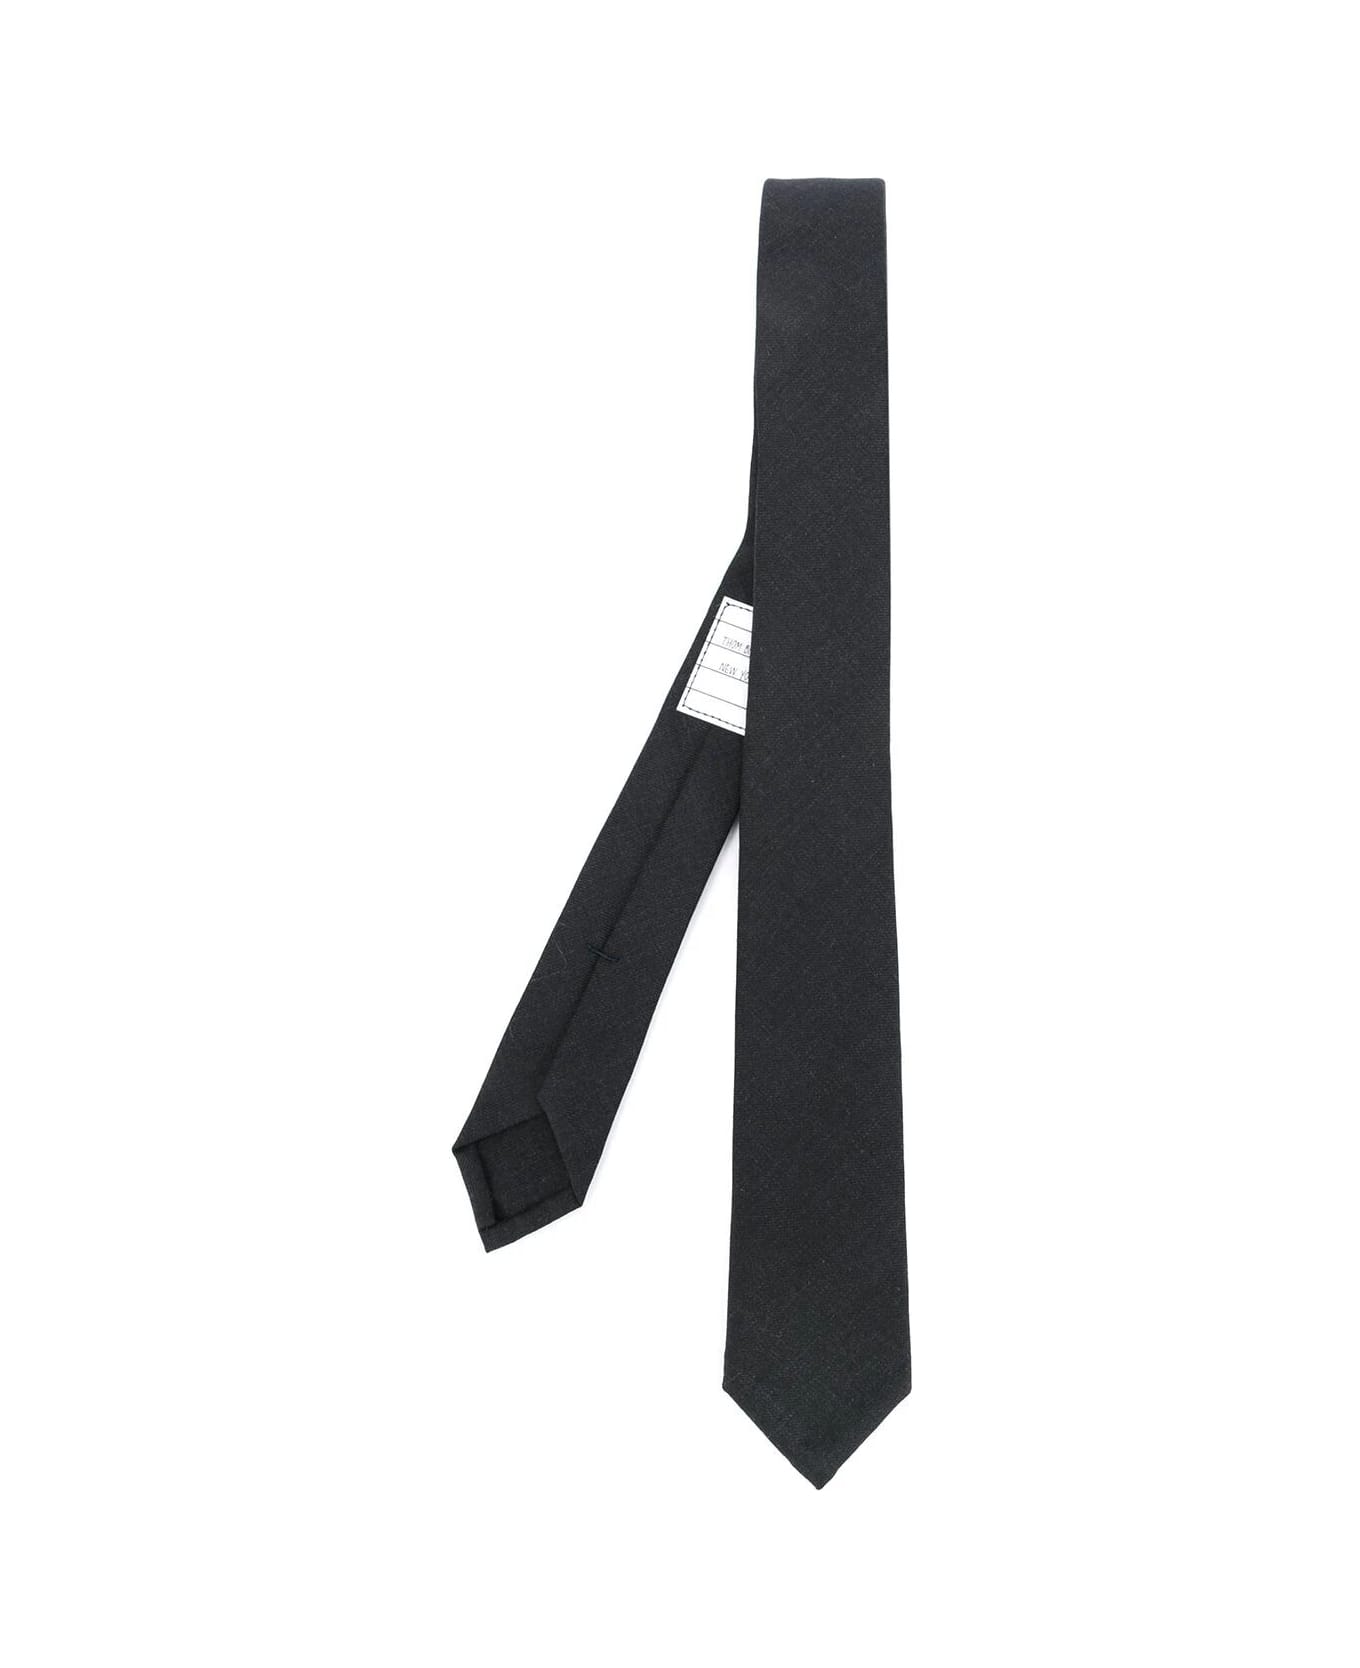 Thom Browne Classic Tie In Super 120 S Twill - Charcoal ネクタイ